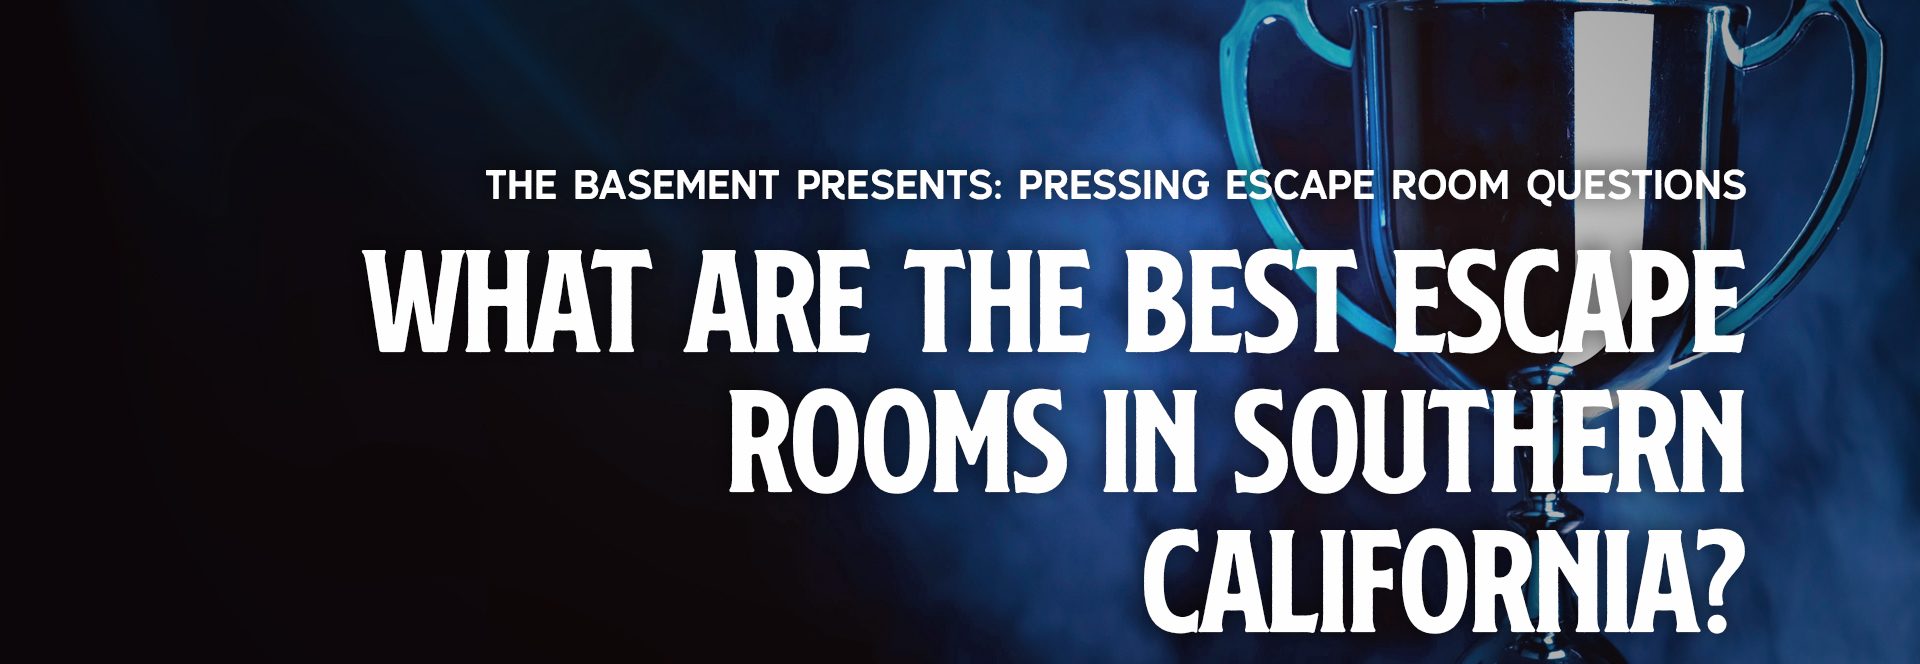 The Best Escape Rooms in Southern California What Are The Best Escape Rooms in Southern California The Basement: A Live Escape Room Experience - The Basement in Los Angeles is the top-rated escape room in Southern California. It offers a range of unique and challenging games, with its puzzles ranging from easy to difficult so that everyone can have a good time. Exit Game - Situated in Monterey Park, it is one of Southern California's largest escape rooms. Known for its tech-savvy and innovative puzzles, Exit Game brings a cinematic experience to its players. Escape Room LA - A pioneer in the escape room industry, Escape Room LA offers a variety of intricately designed games set in a range of environments, such as a haunted theatre or a mystical Mayan pyramid. Maze Rooms - With locations scattered across Los Angeles, Maze Rooms offers a broad spectrum of escape room themes. Each room is finely crafted and filled with creative, one-of-a-kind puzzles. 60 Out - Known for its realistic and immersive escape rooms, 60 Out has multiple locations across Los Angeles. With a variety of themes, from a Jumanji-inspired game to a magic school adventure, 60 Out offers something for everyone. Remember, these popular escape rooms are not only about solving puzzles but also about enjoying the journey. Each one provides a unique, immersive experience that is sure to create lasting memories!